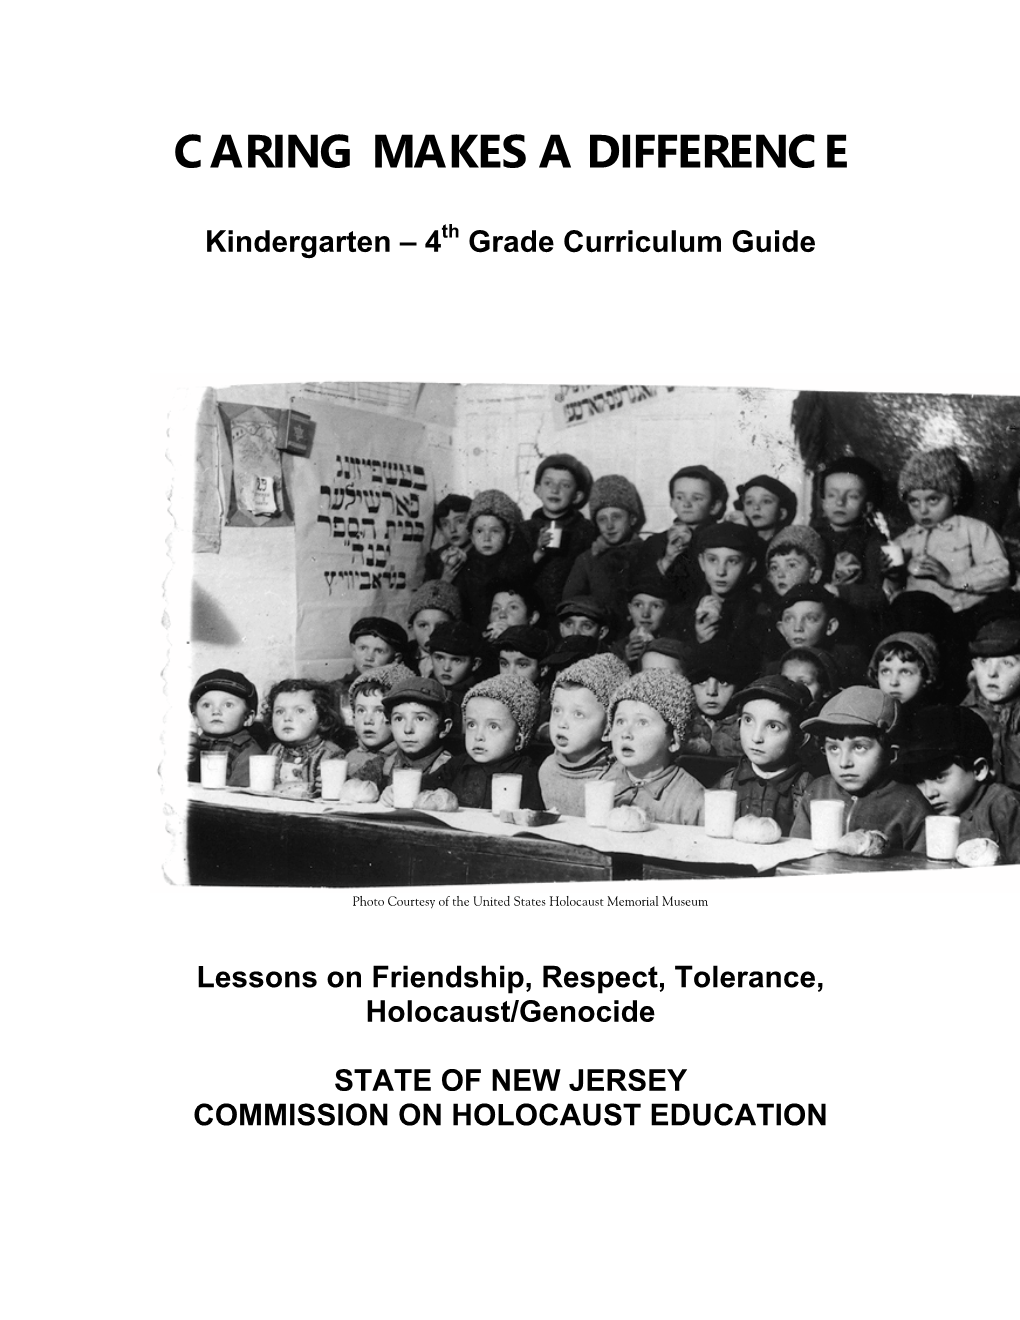 Caring Makes a Difference: a Curriculum Guide for Grades K-4